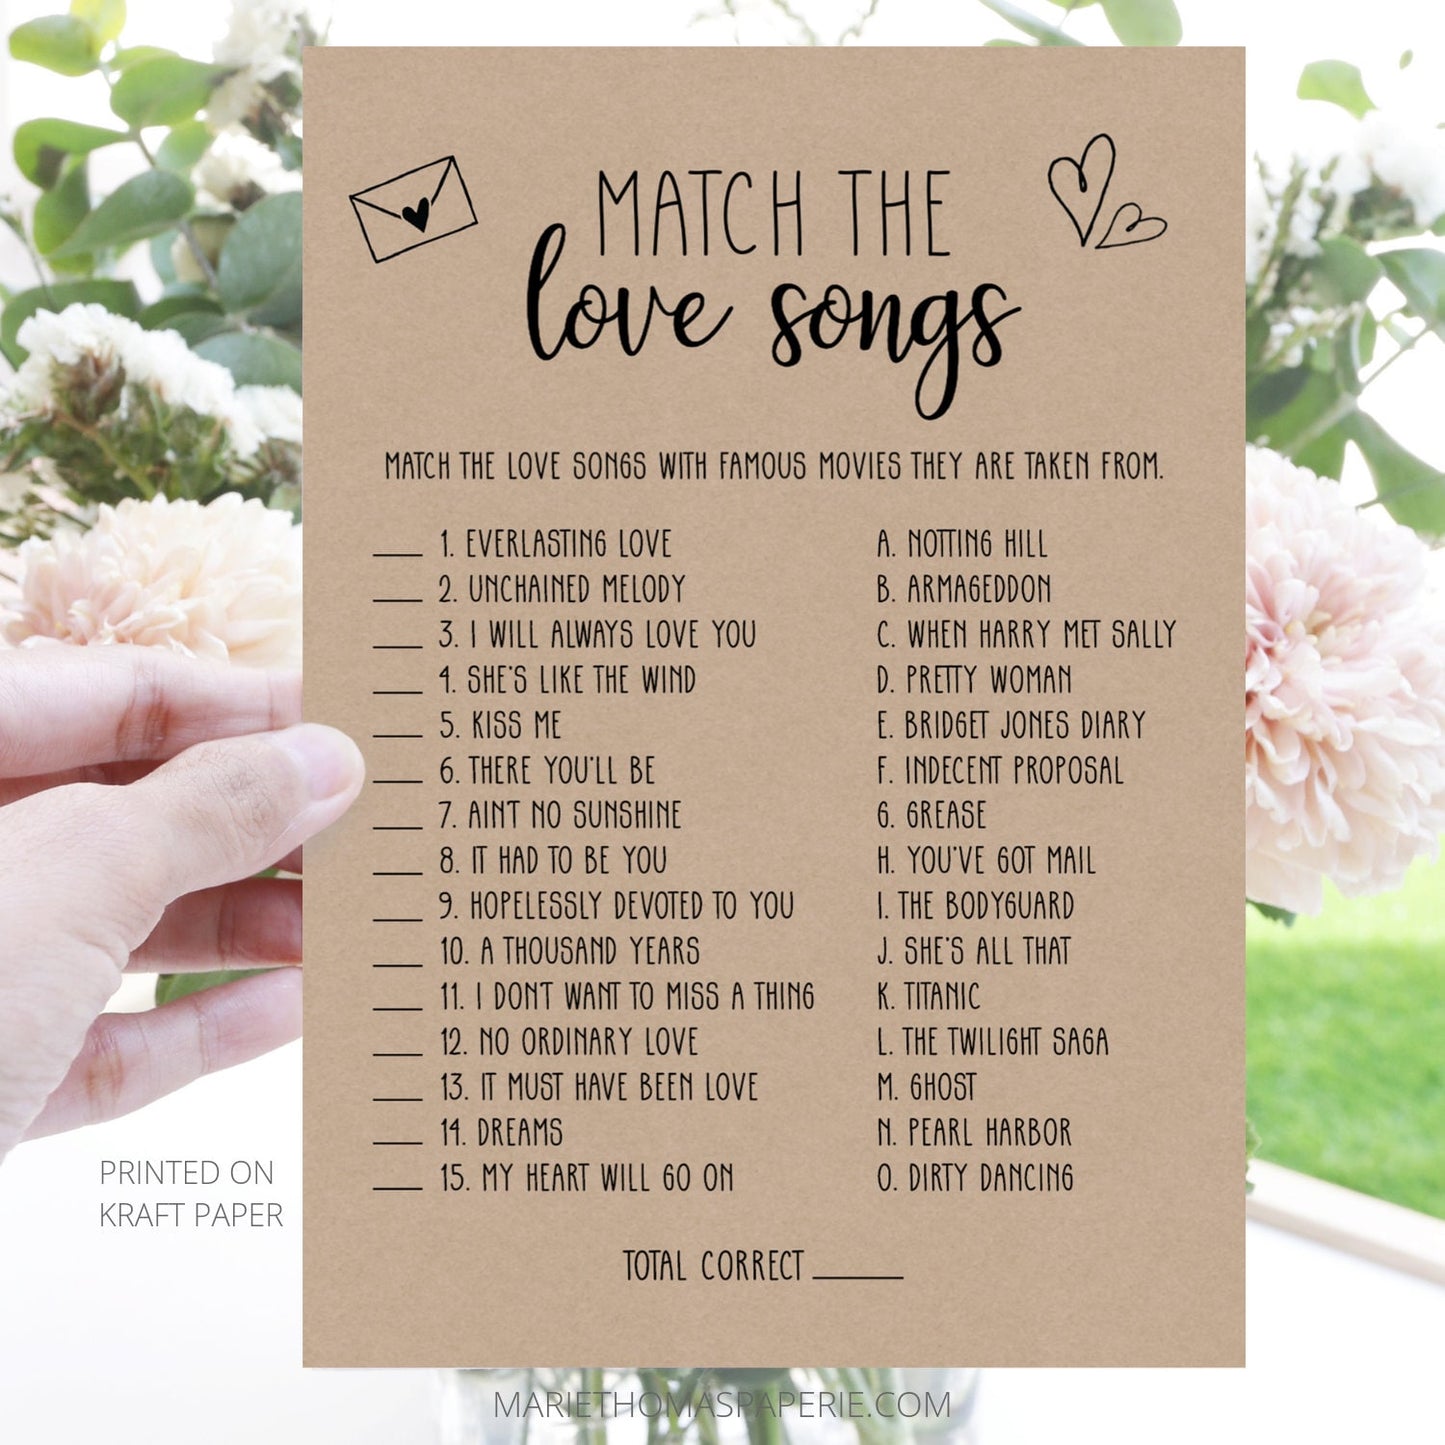 Editable Match the Love Songs Bridal Shower Games Rustic Kraft Paper Template